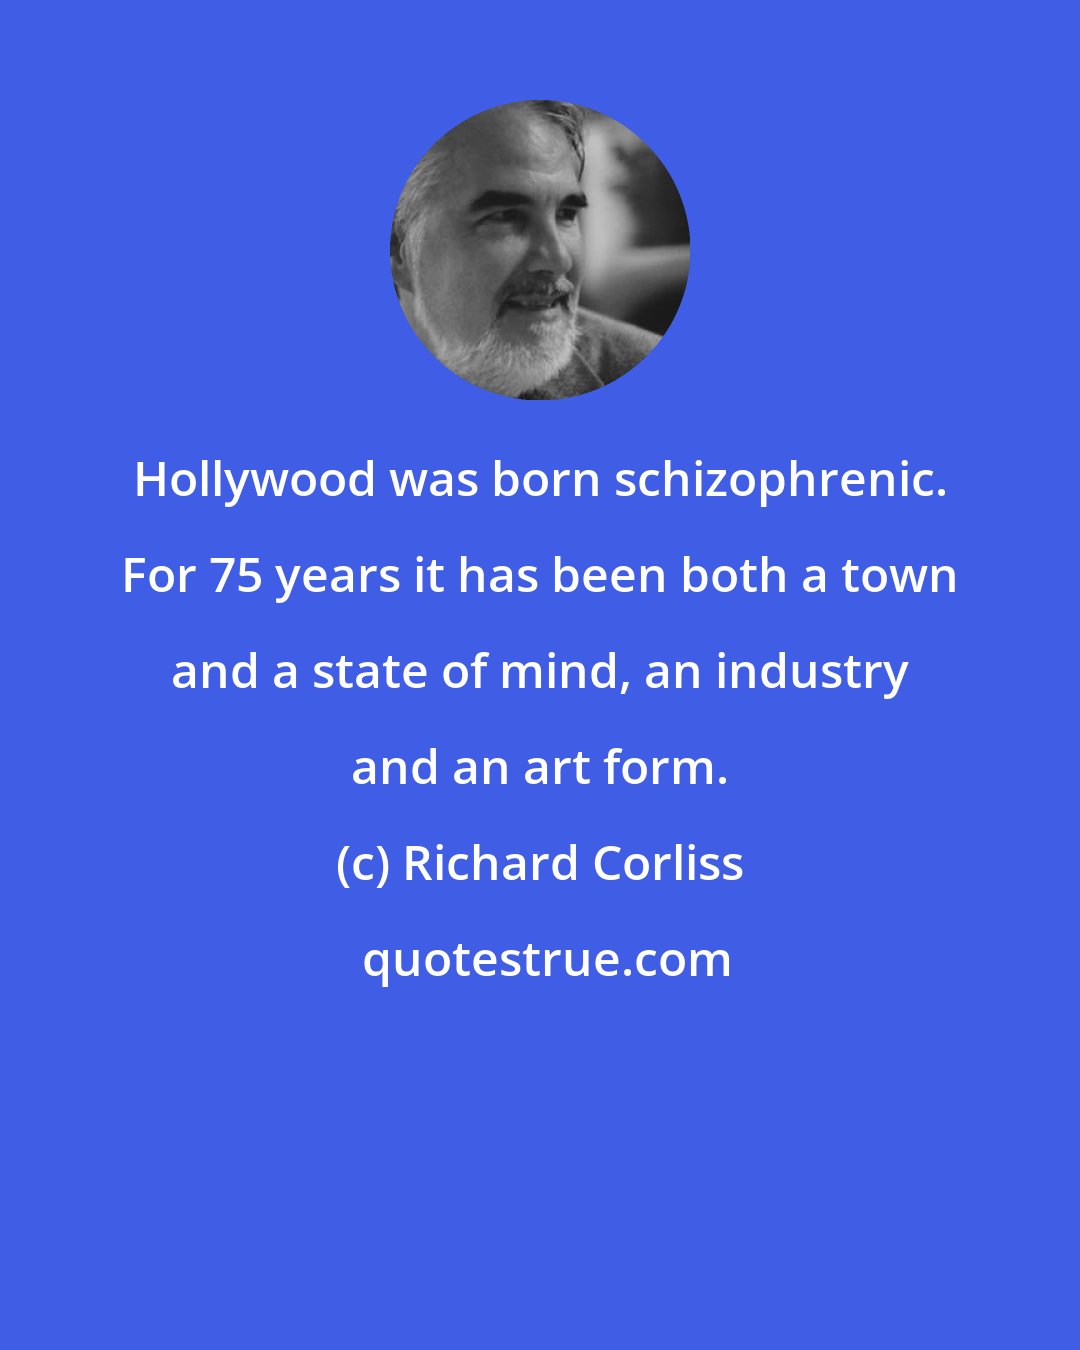 Richard Corliss: Hollywood was born schizophrenic. For 75 years it has been both a town and a state of mind, an industry and an art form.